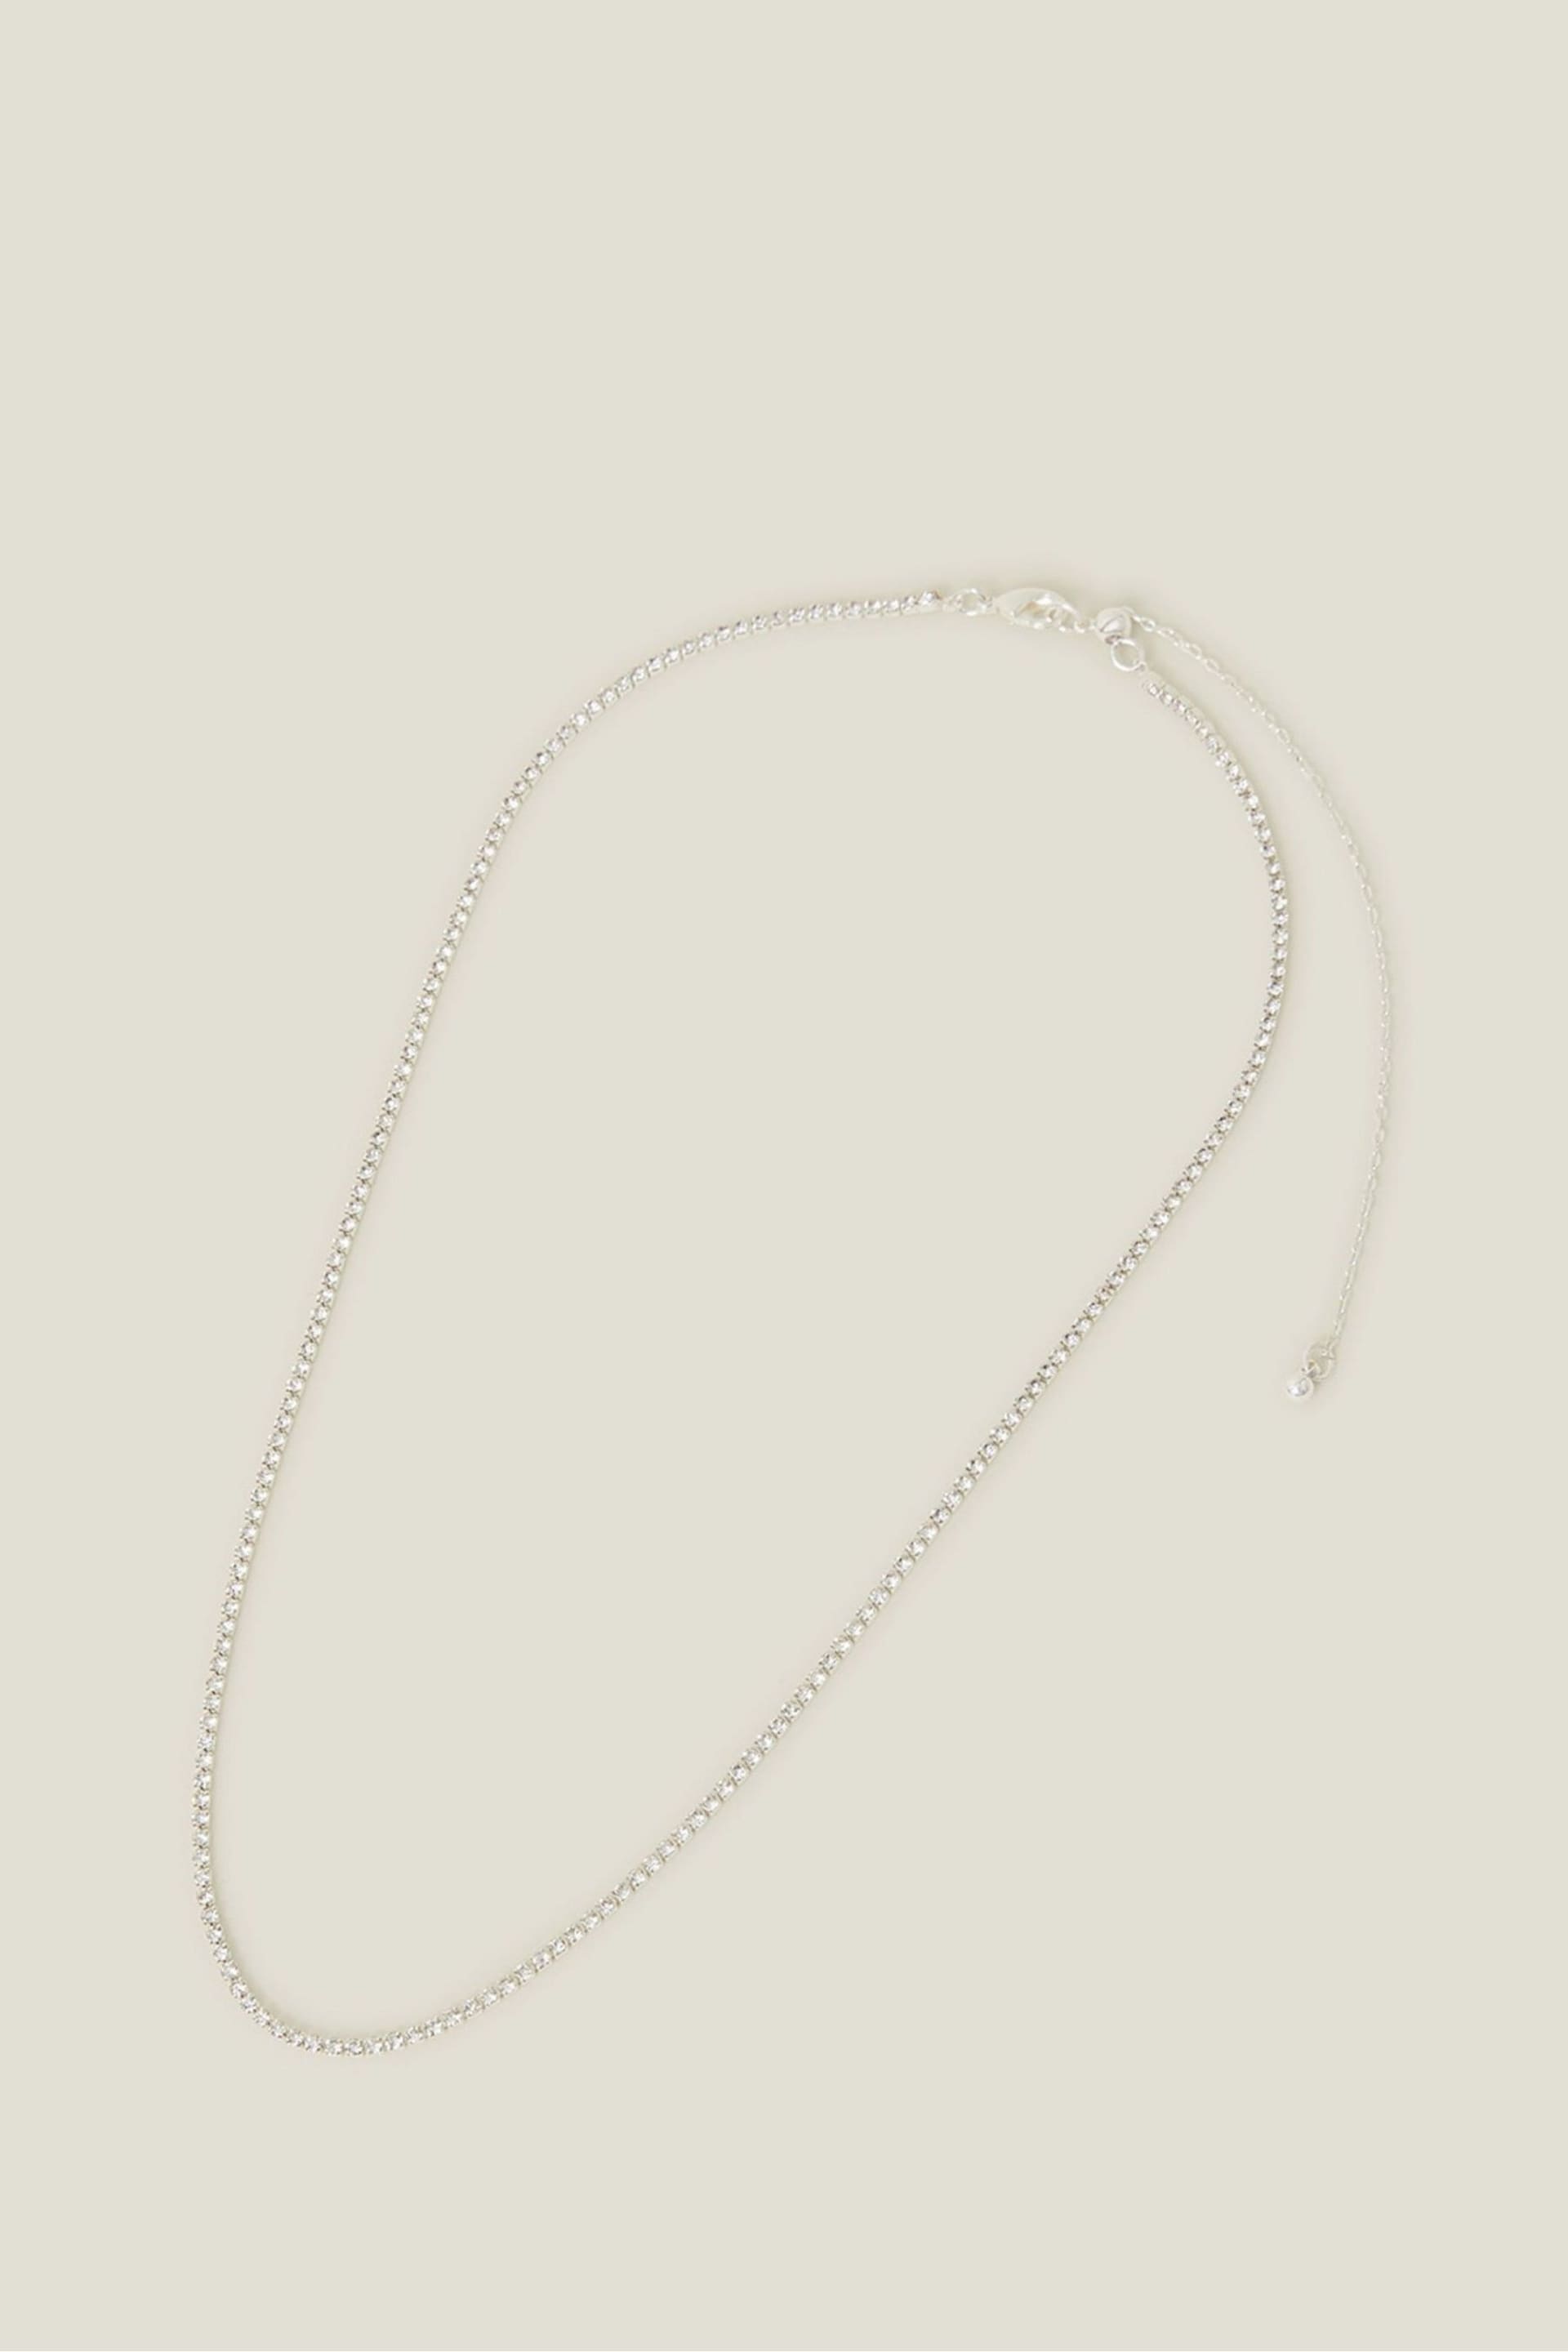 Accessorize Sterling Silver Plated Tennis Necklace - Image 1 of 3